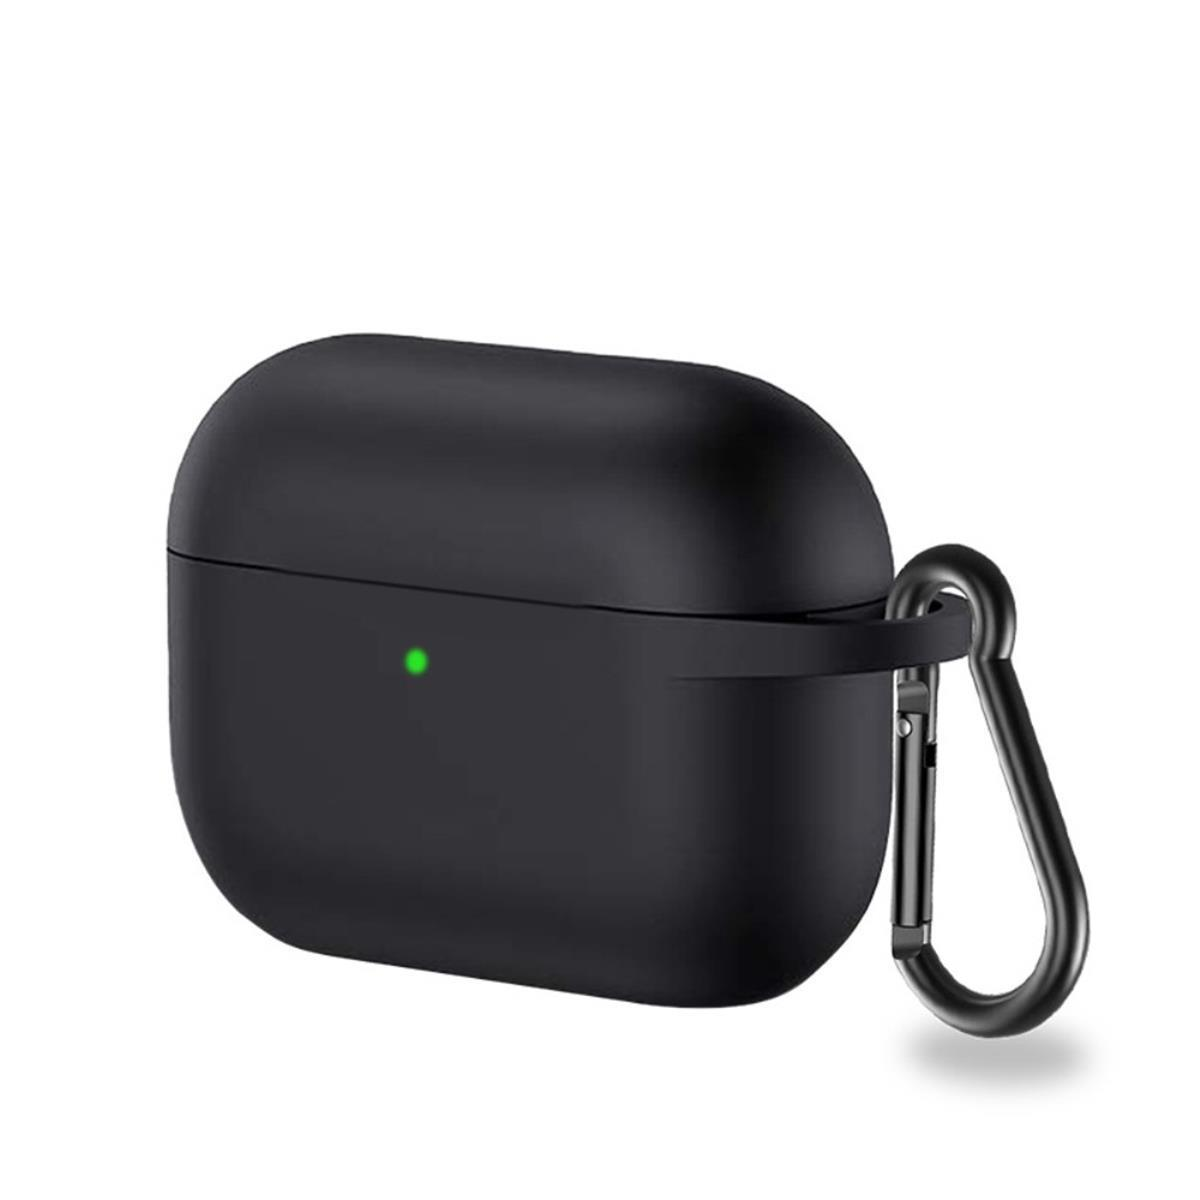 COVERKINGZ Silikoncover Ladecase 75422 Apple Unisex, AirPods Pro für Schwarz